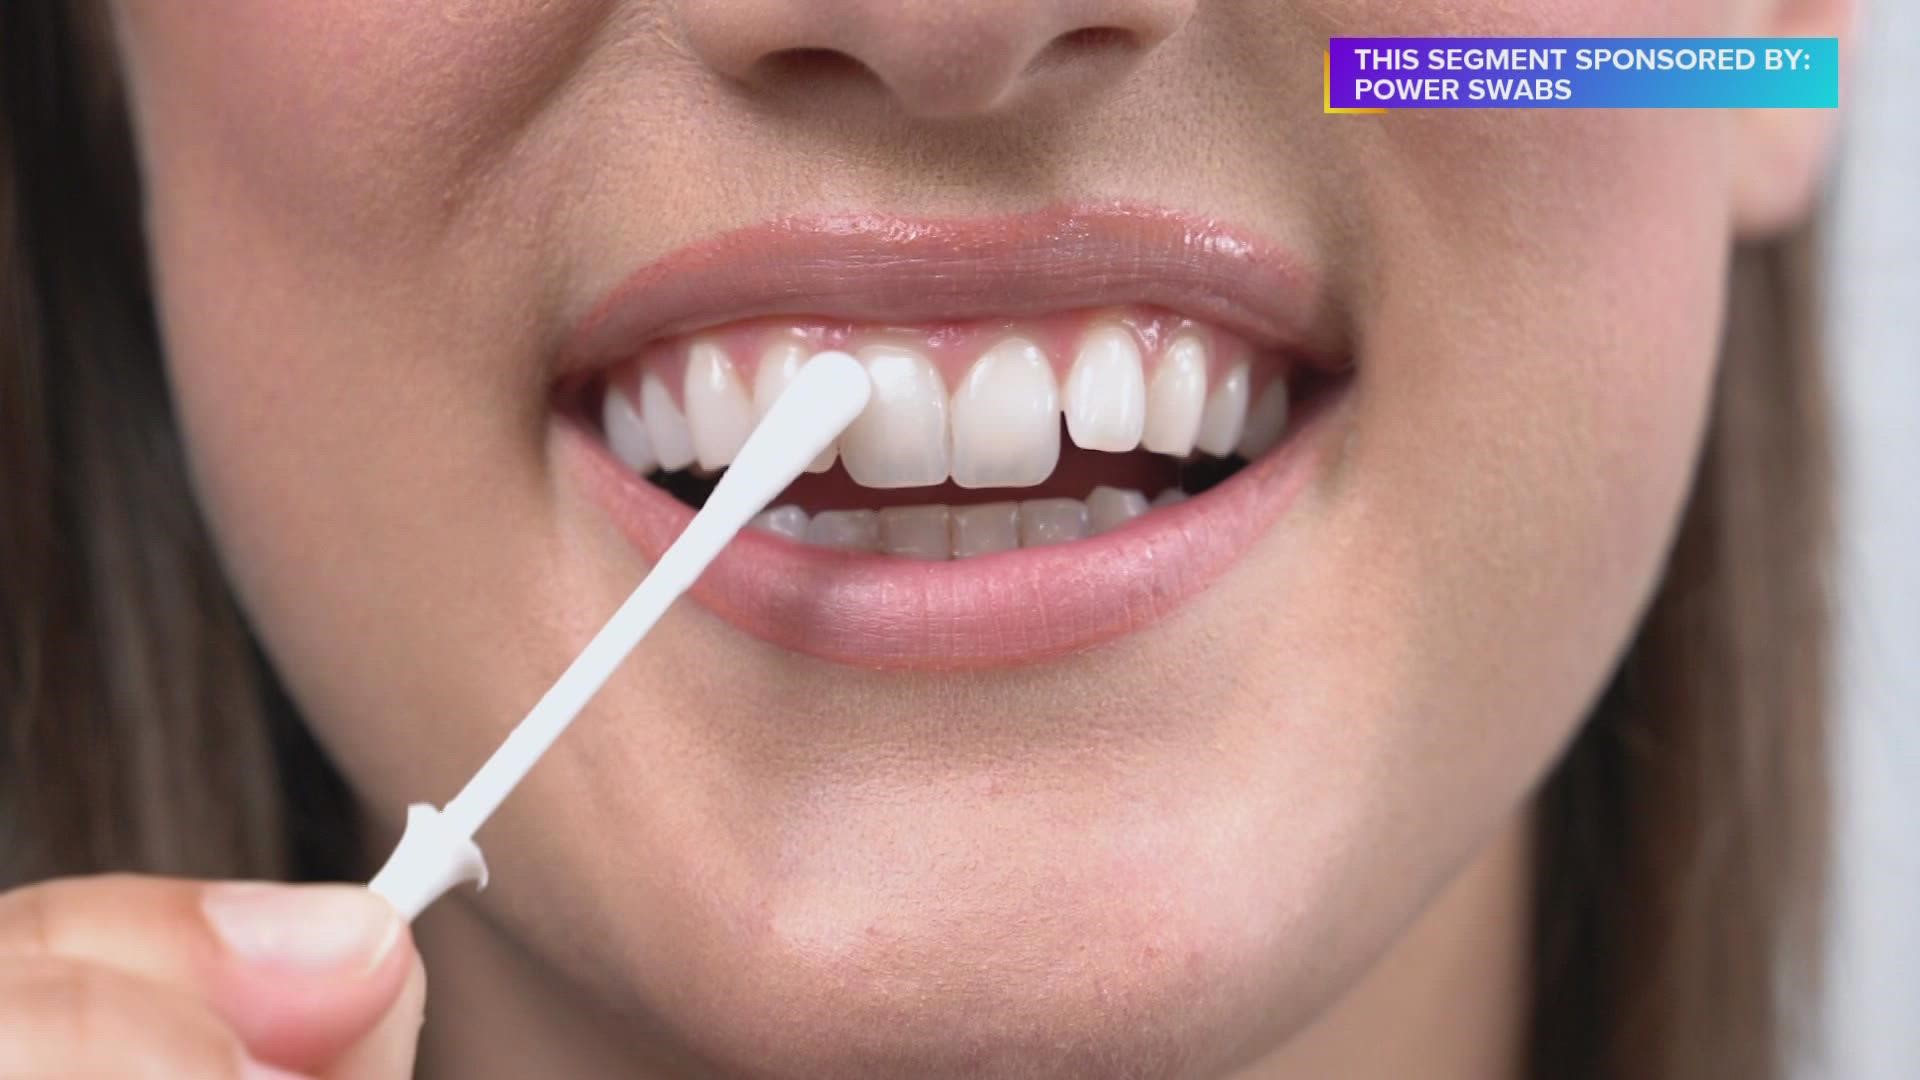 Power Swabs remove stains and whitens teeth two shades in five minutes and six shades in seven days! Results last for up to 6 months of whiter teeth | Paid Content